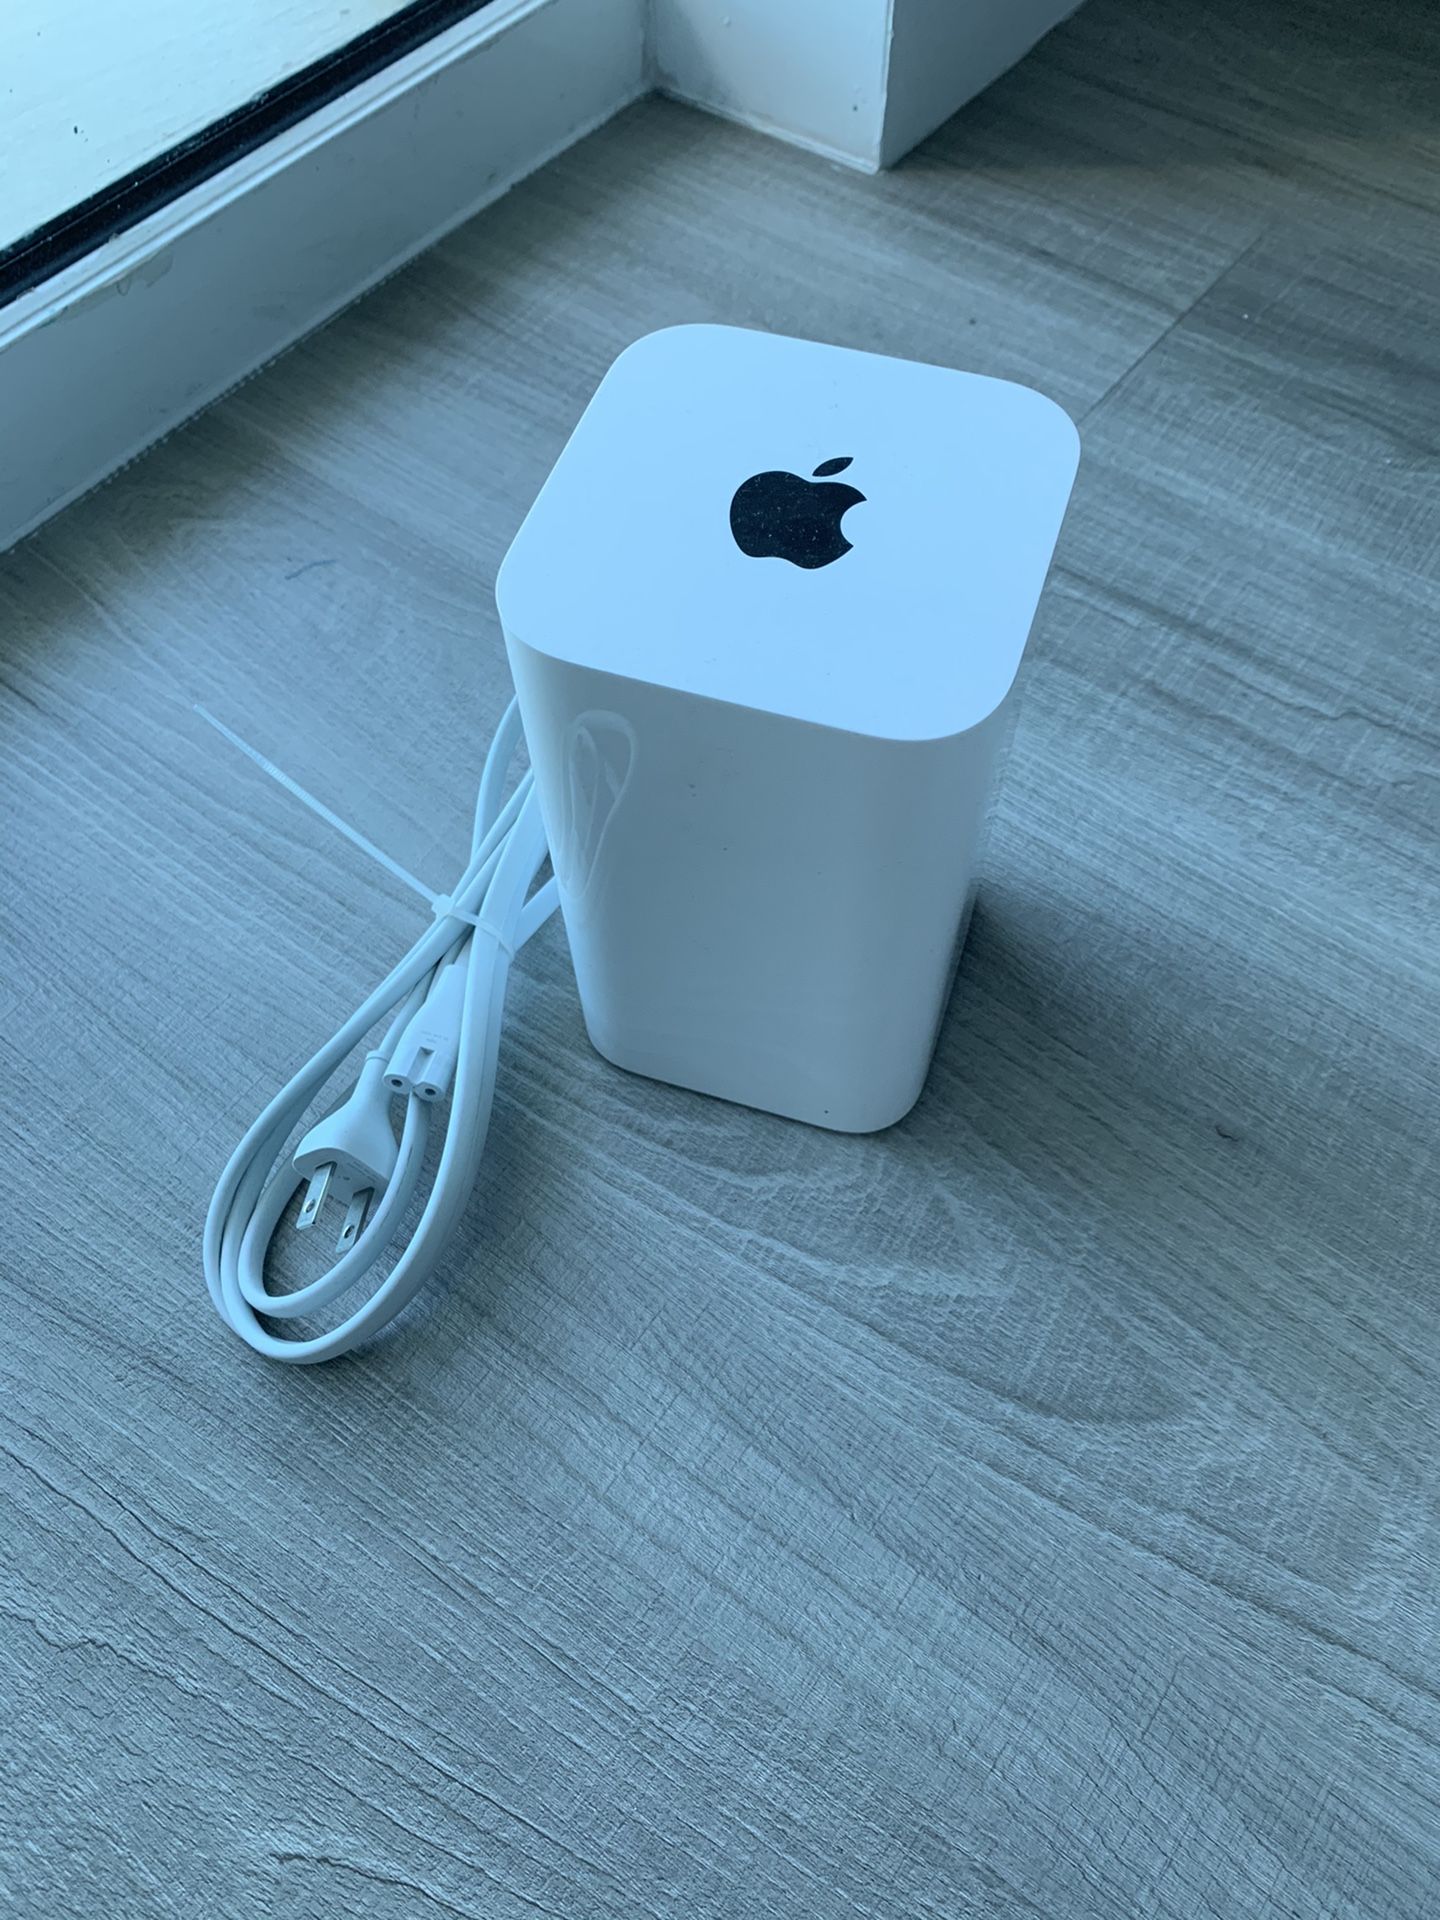 Apple AirPort Extreme Router